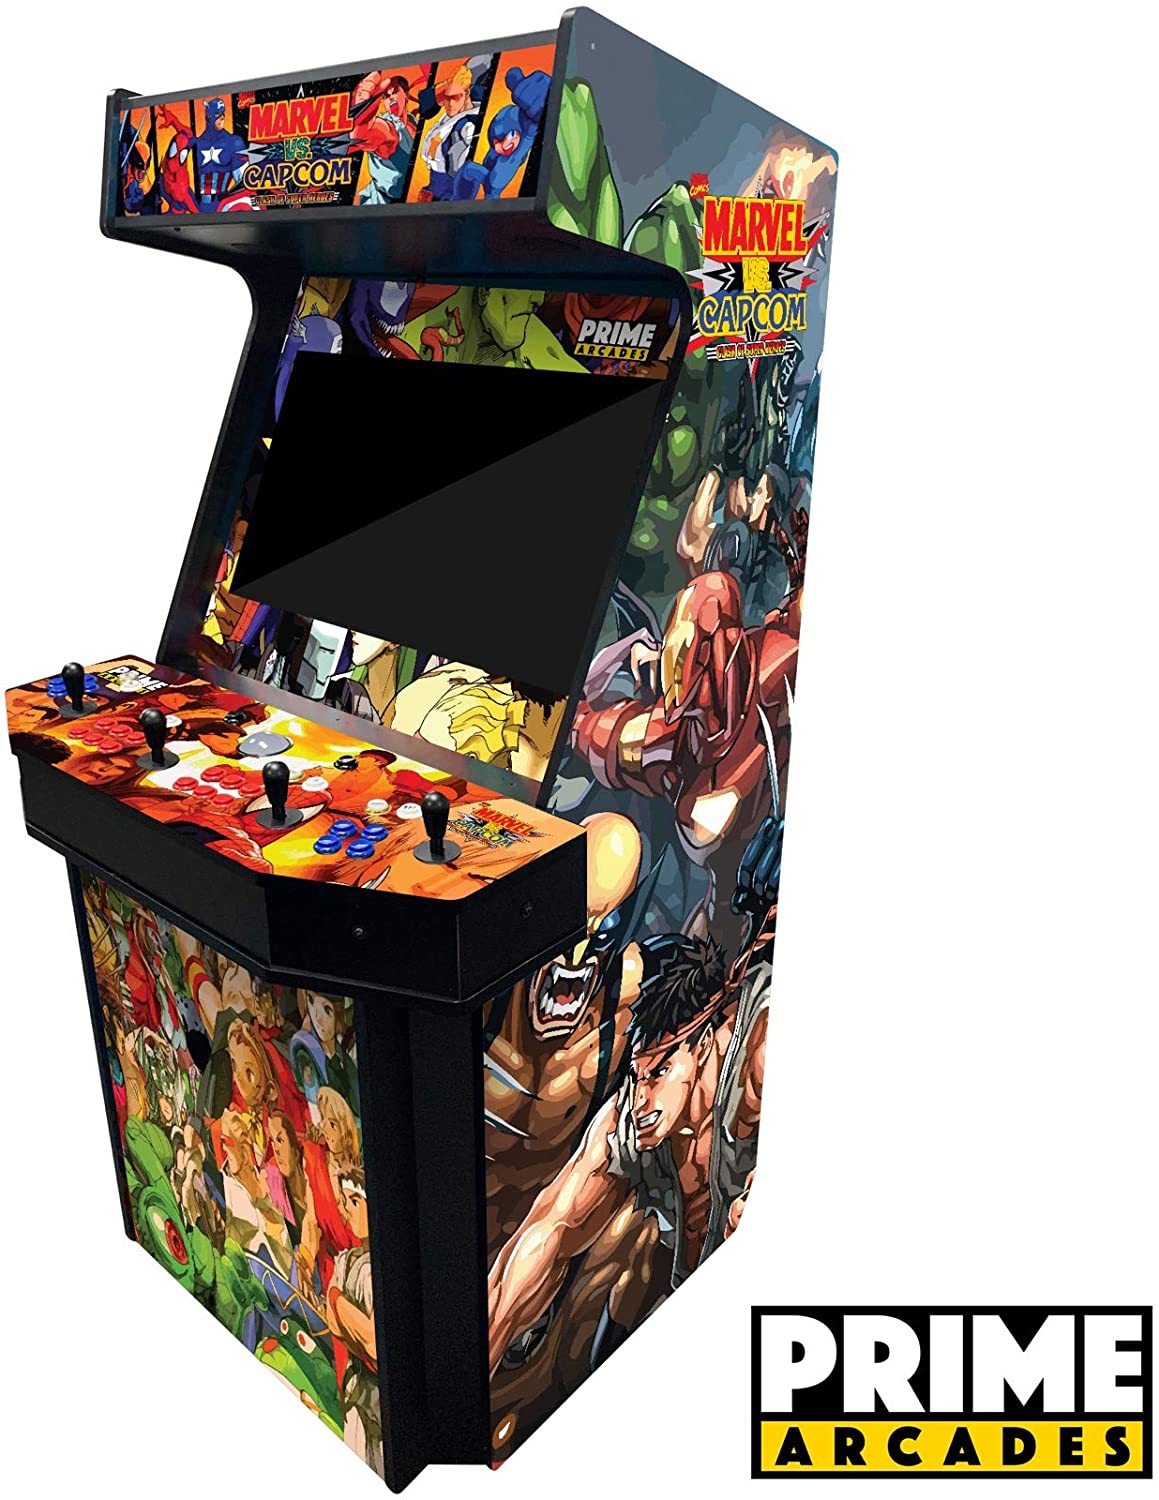 Ultimate Arcade Cabinet at Home